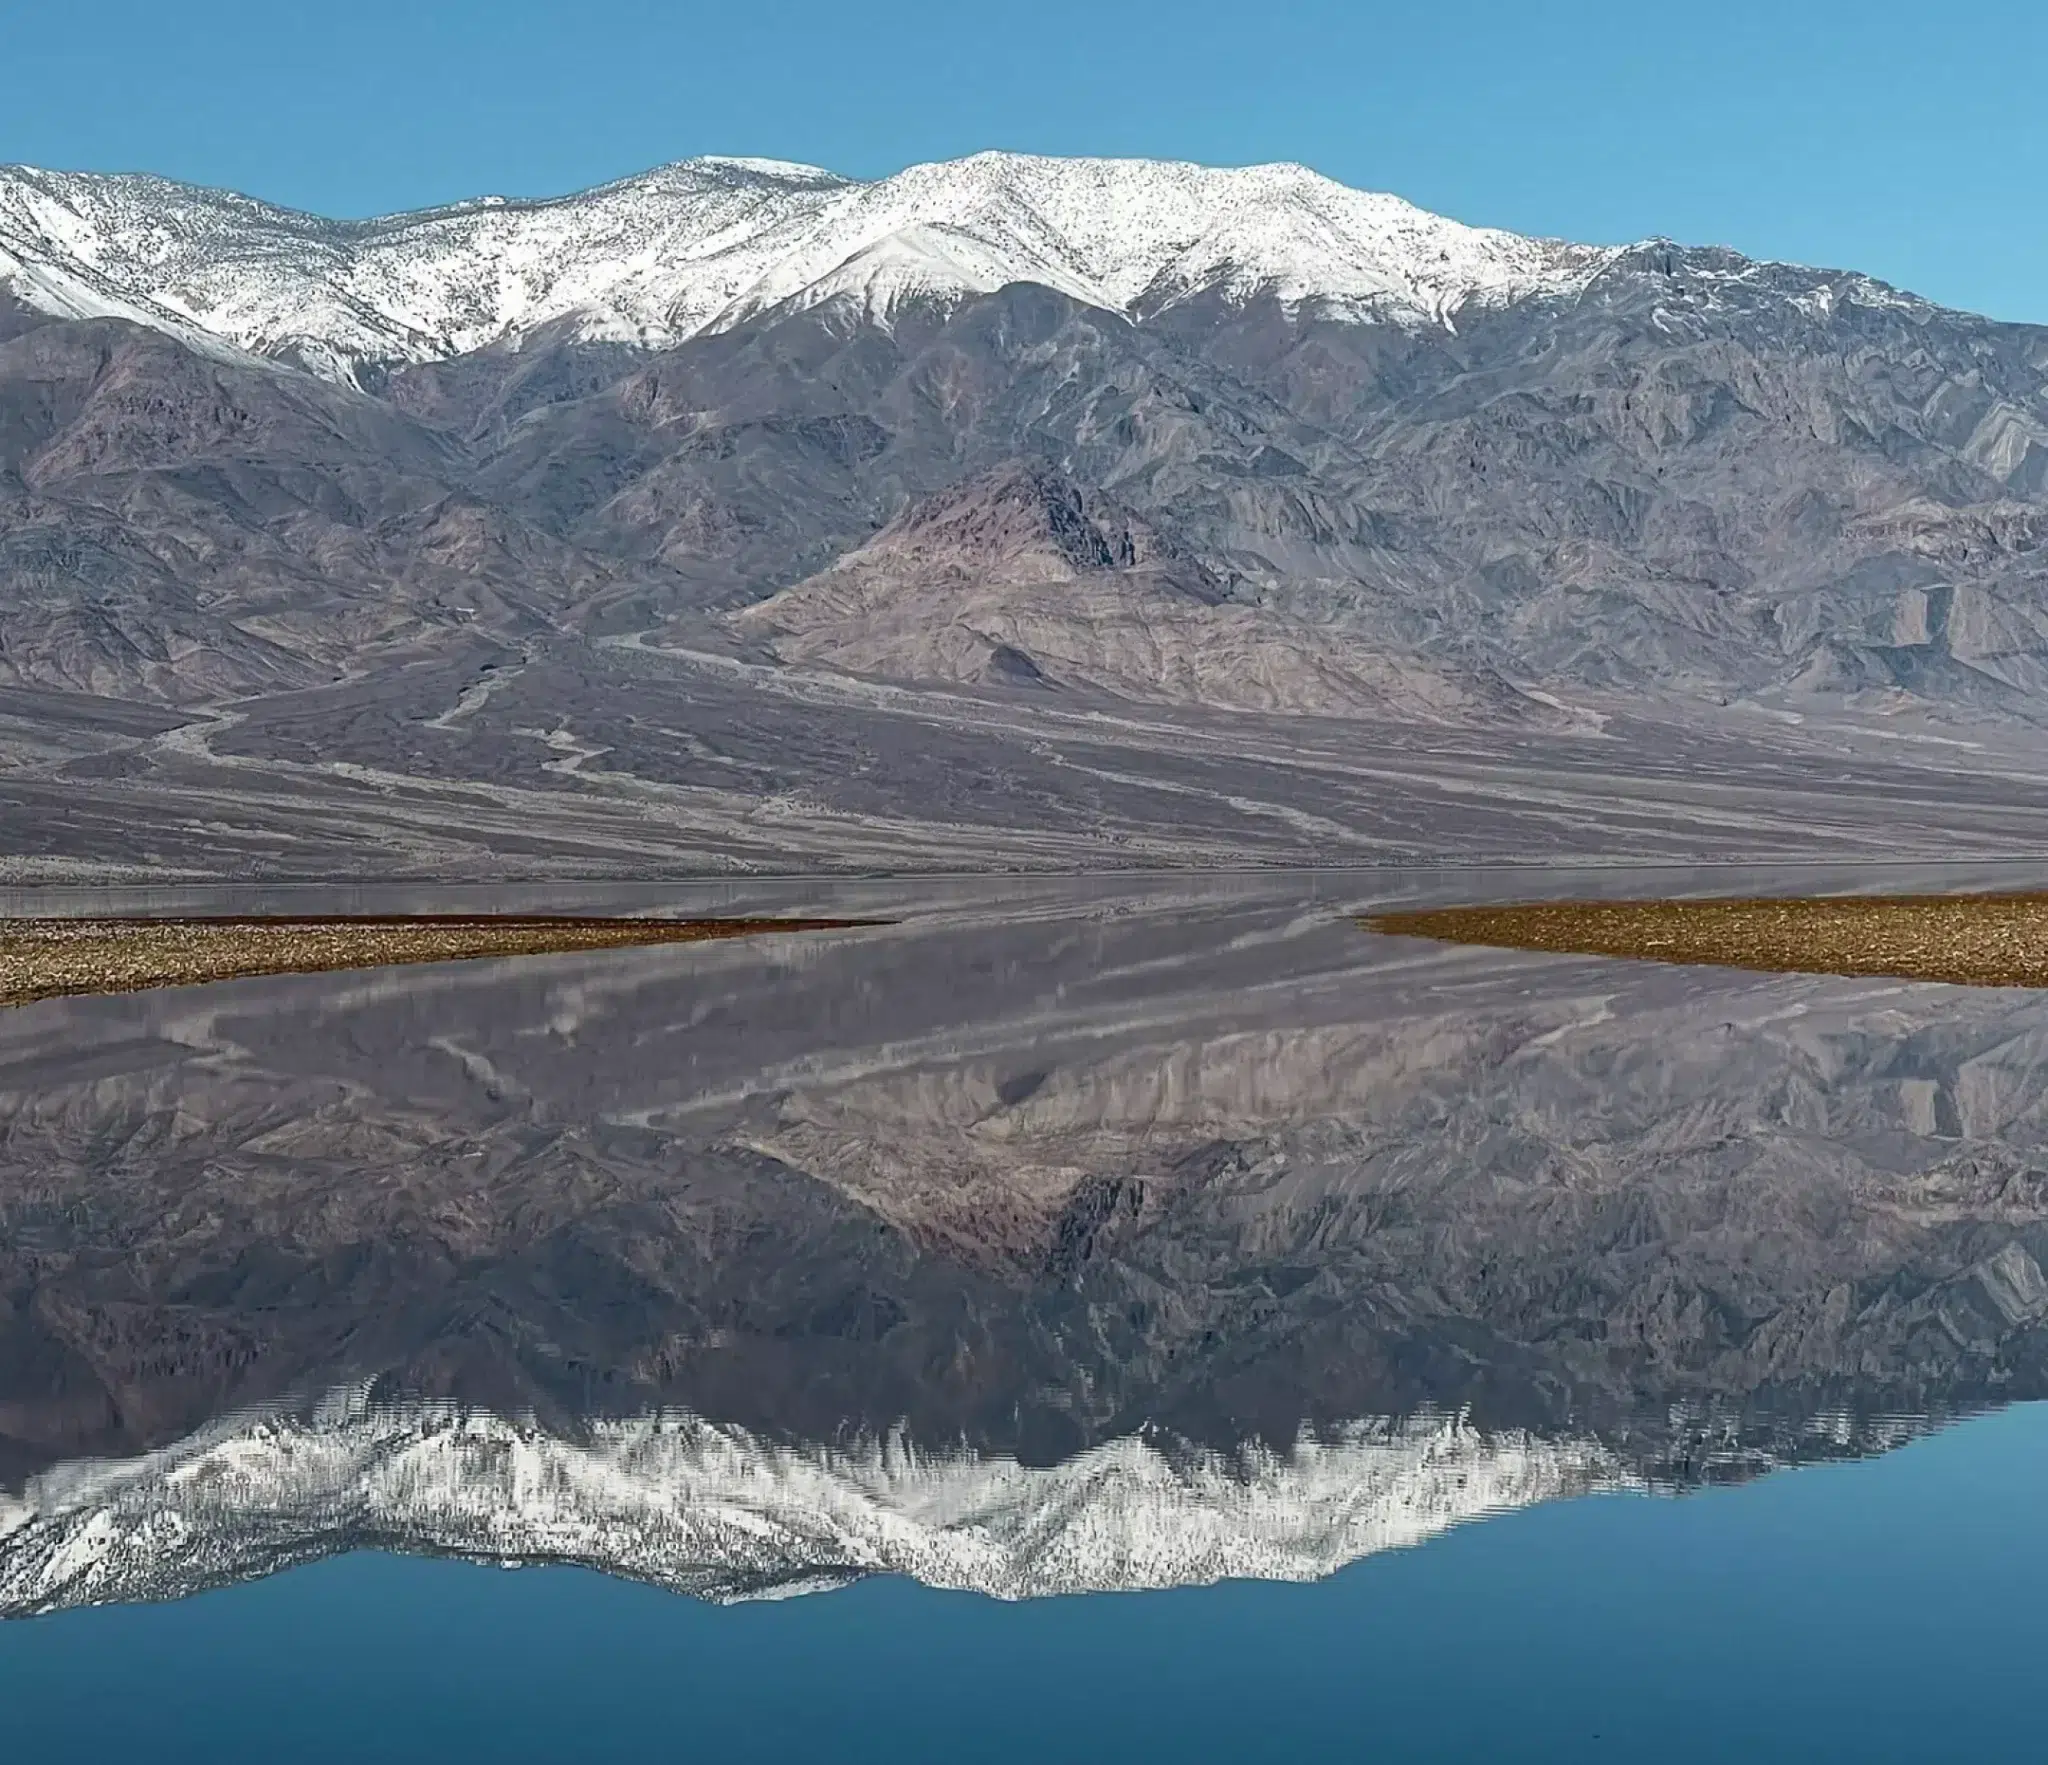 Visiting lake manly in badwater basin death valley national park mountains reflecting in lake